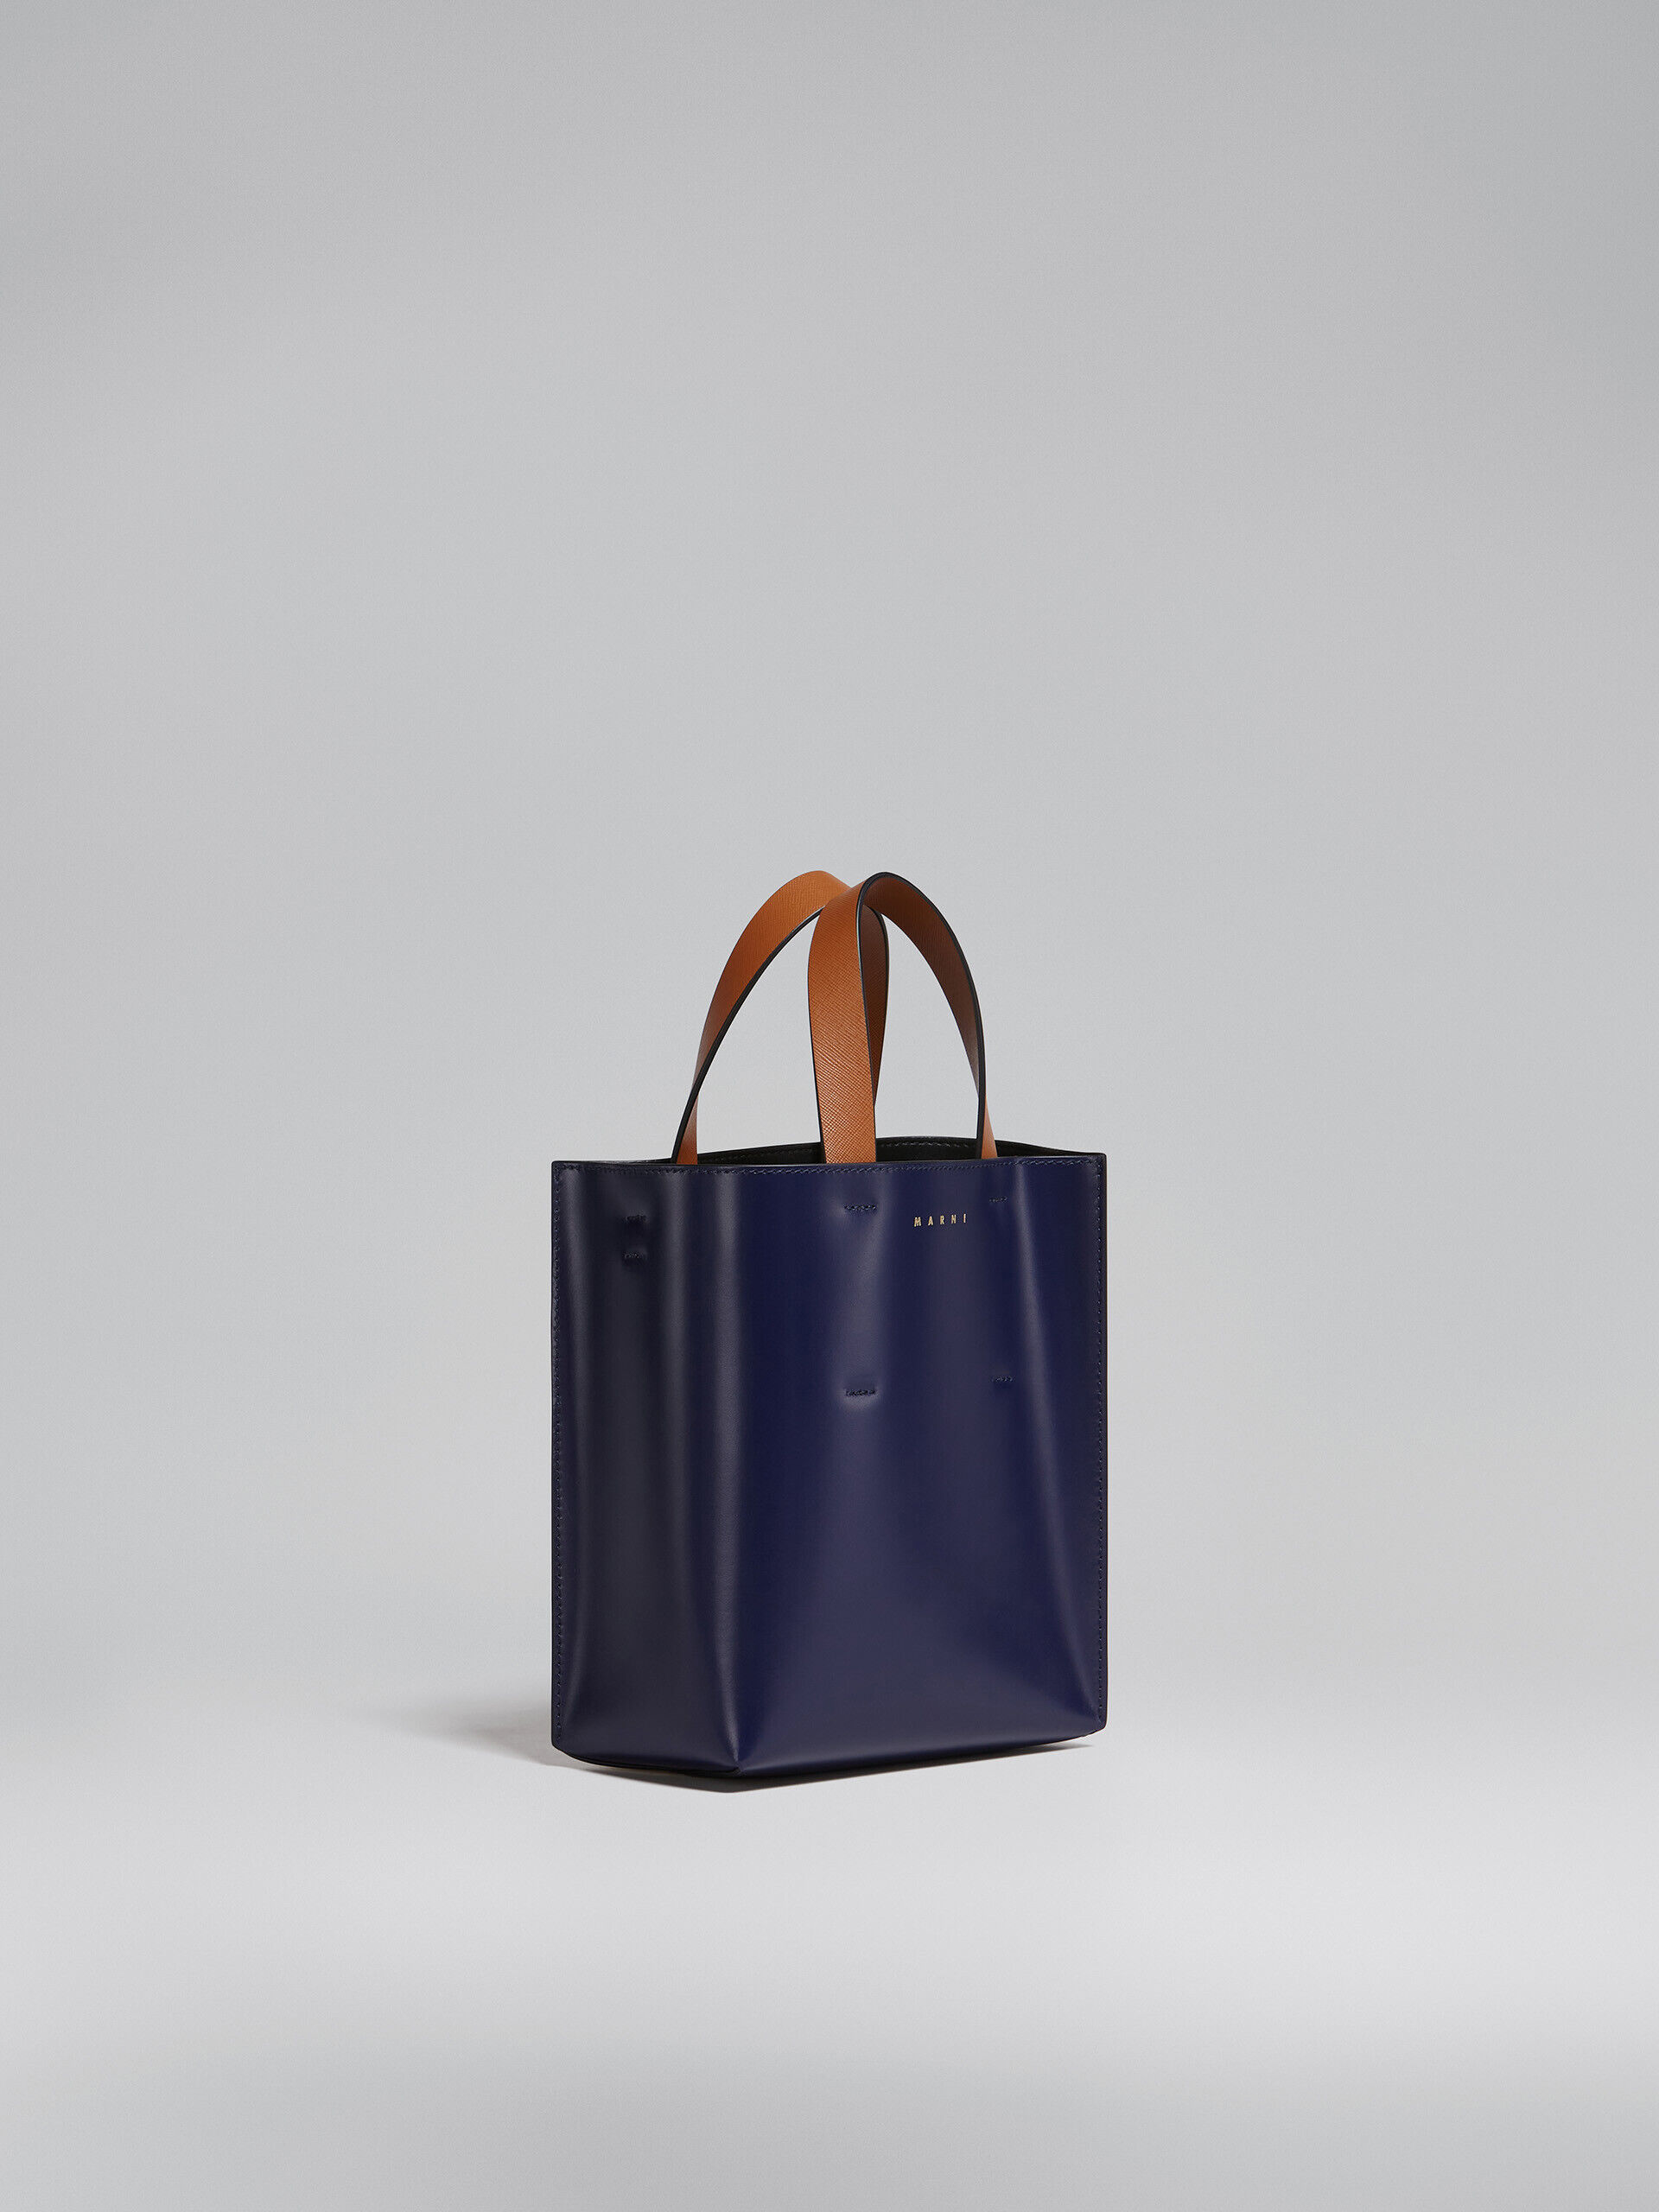 MUSEO mini bag in blue and white leather | Marni